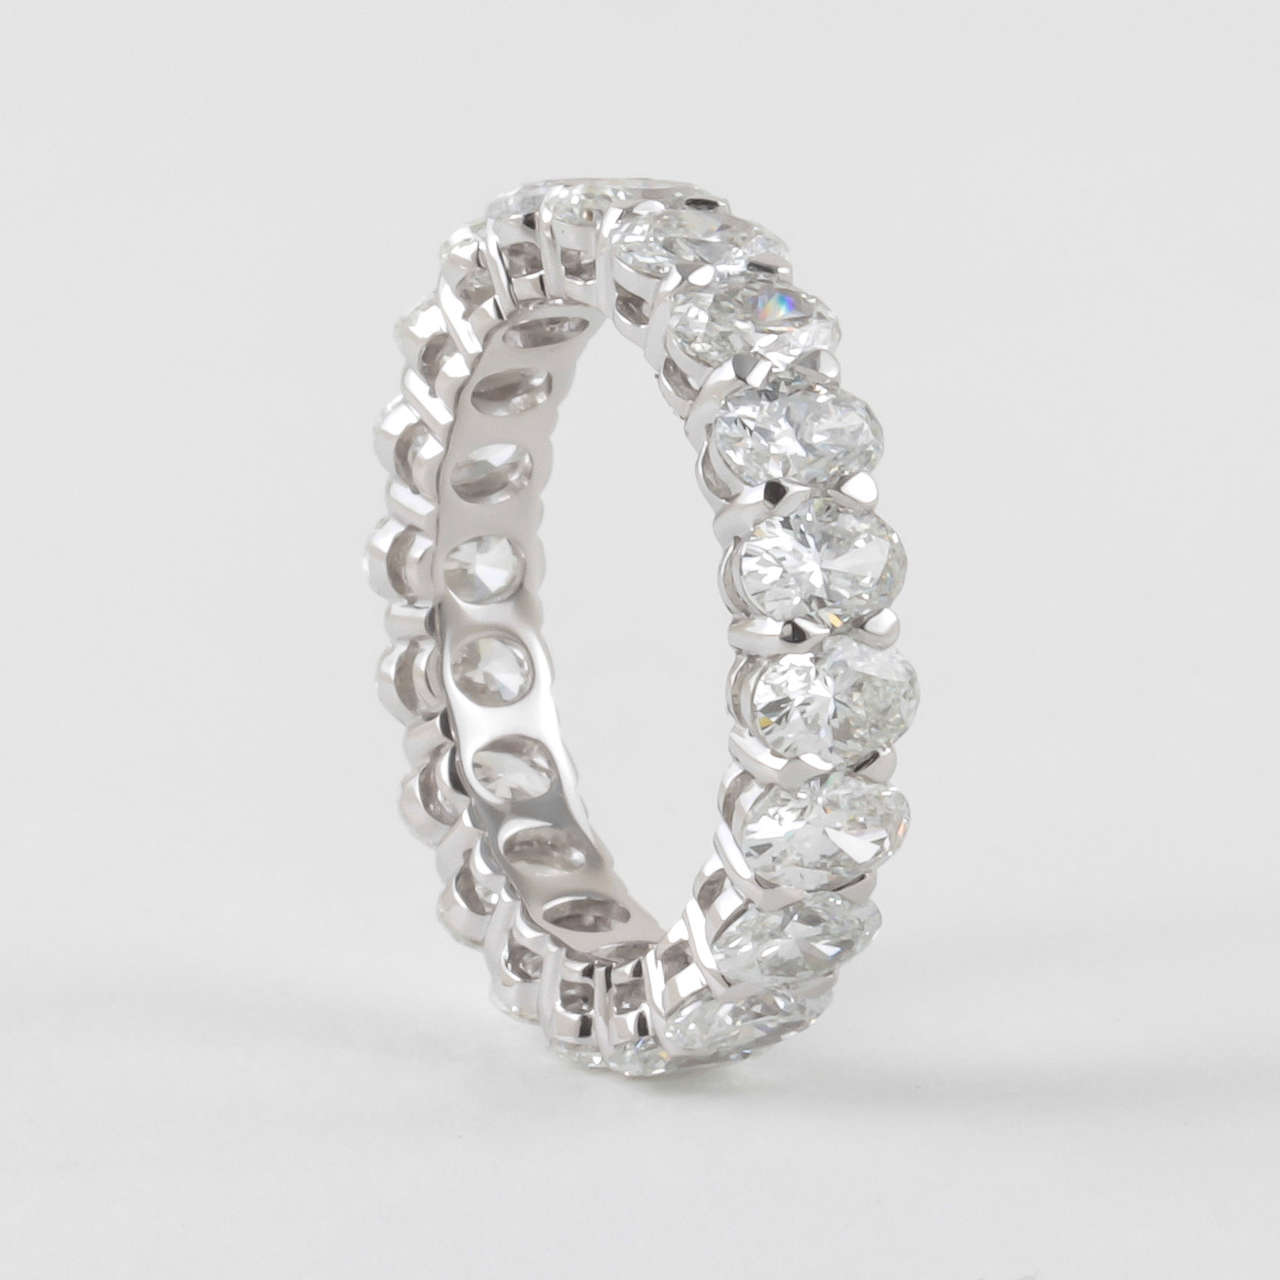 A unique diamond eternity band out of the many that we carry.

4.86 carats of oval shaped diamonds. 

G color Vs clarity

18k white gold

Ring size adjustable, currently a size  6.5